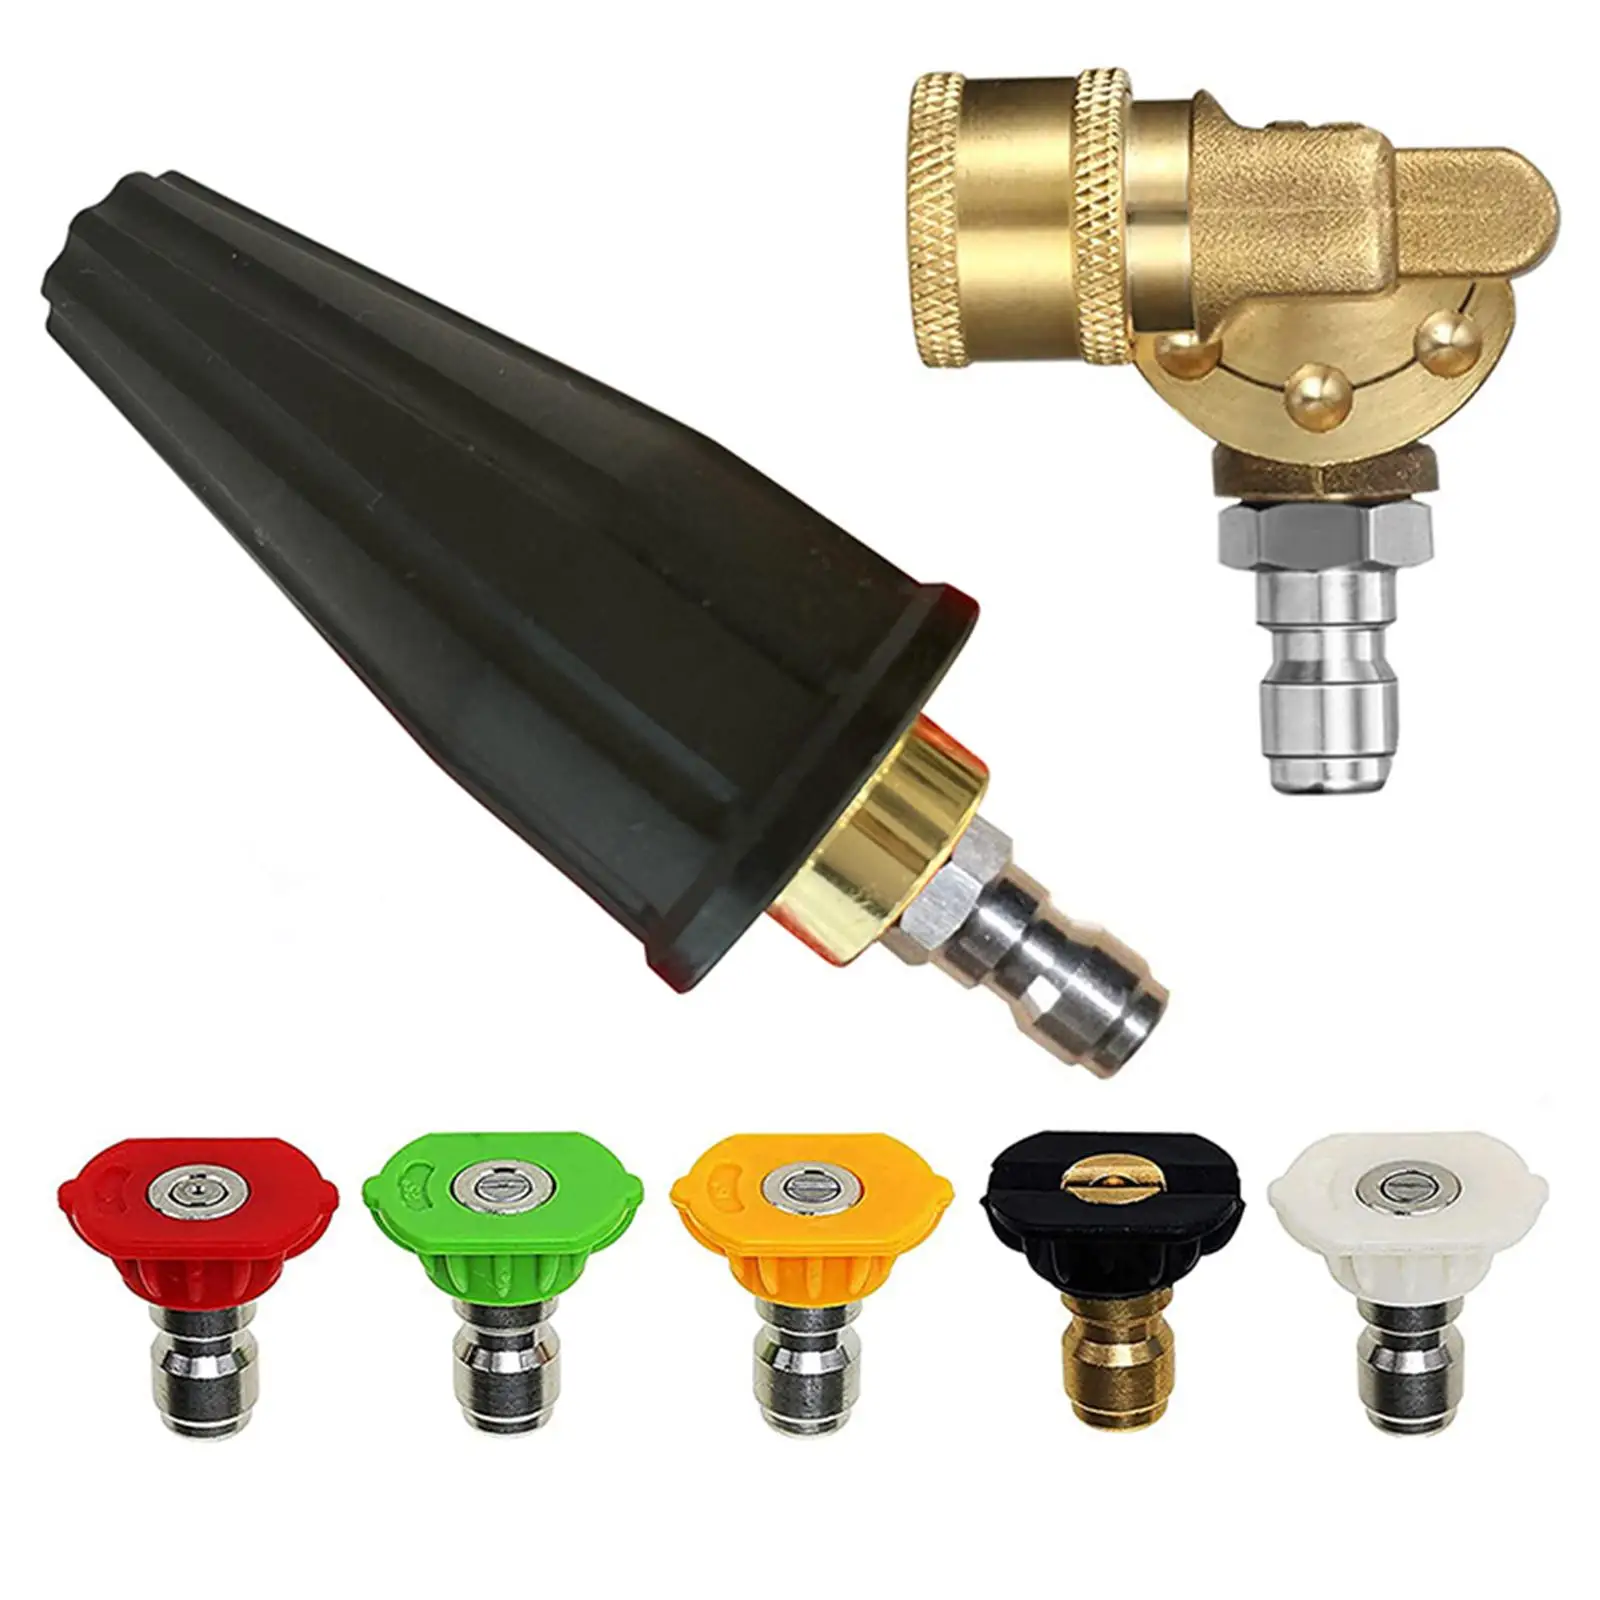 5Pcs Pressure Washer  Kit Lotus Rotation Angle Adjustable High Pressure Rotary Nozzle Pressure Washer  Adapter